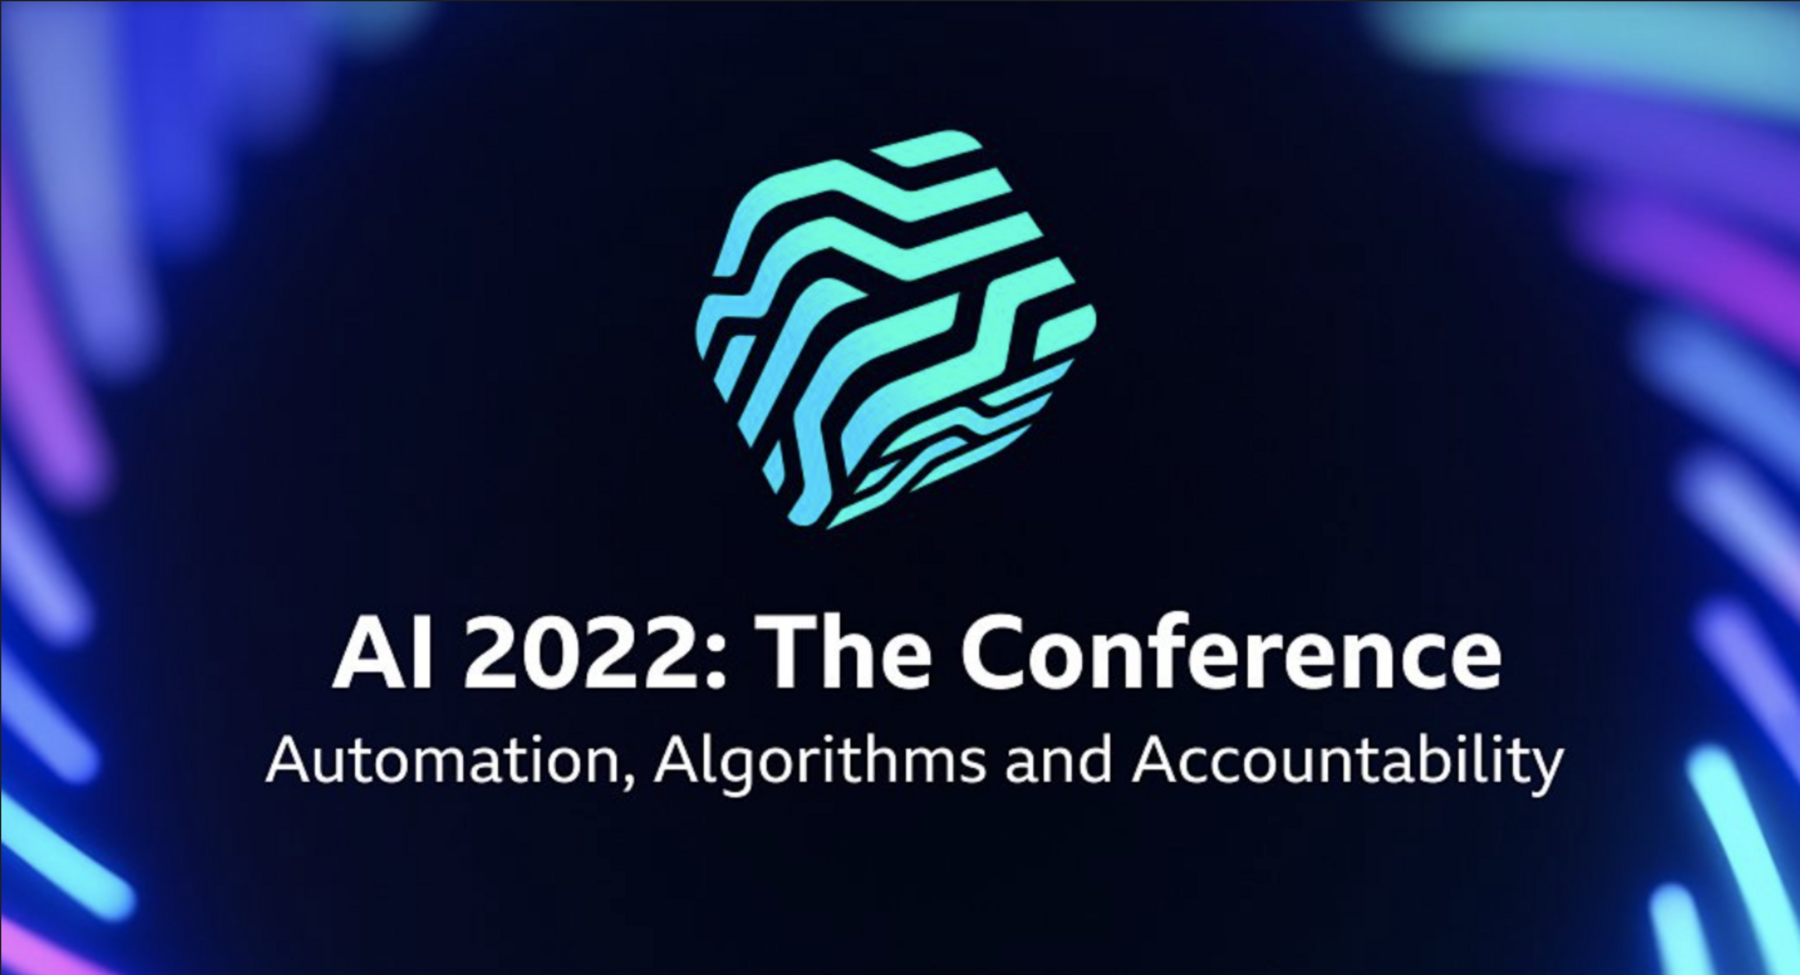 Event header image with the text “AI 2022: The Conference Automation, Algorithms and Accountability.” Full description in caption.